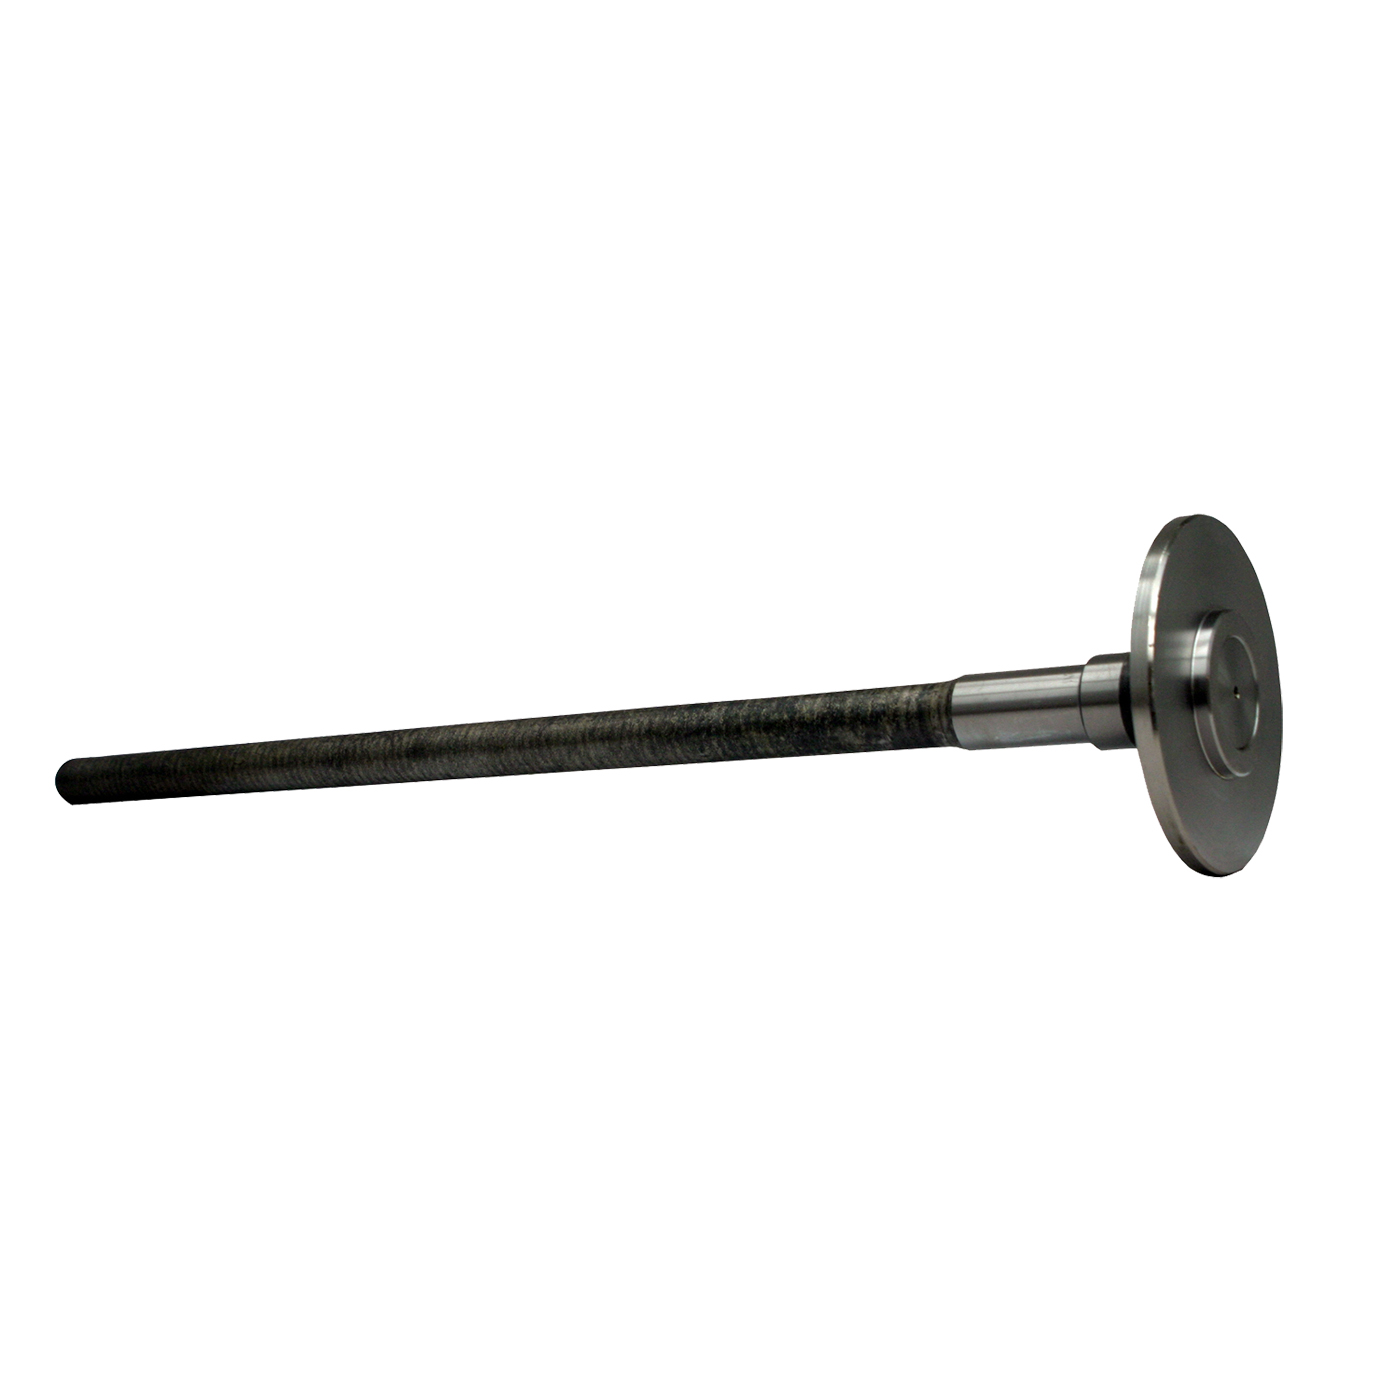 Yukon Semi-floating axle blank with C/Clip. 33.42 inches long.